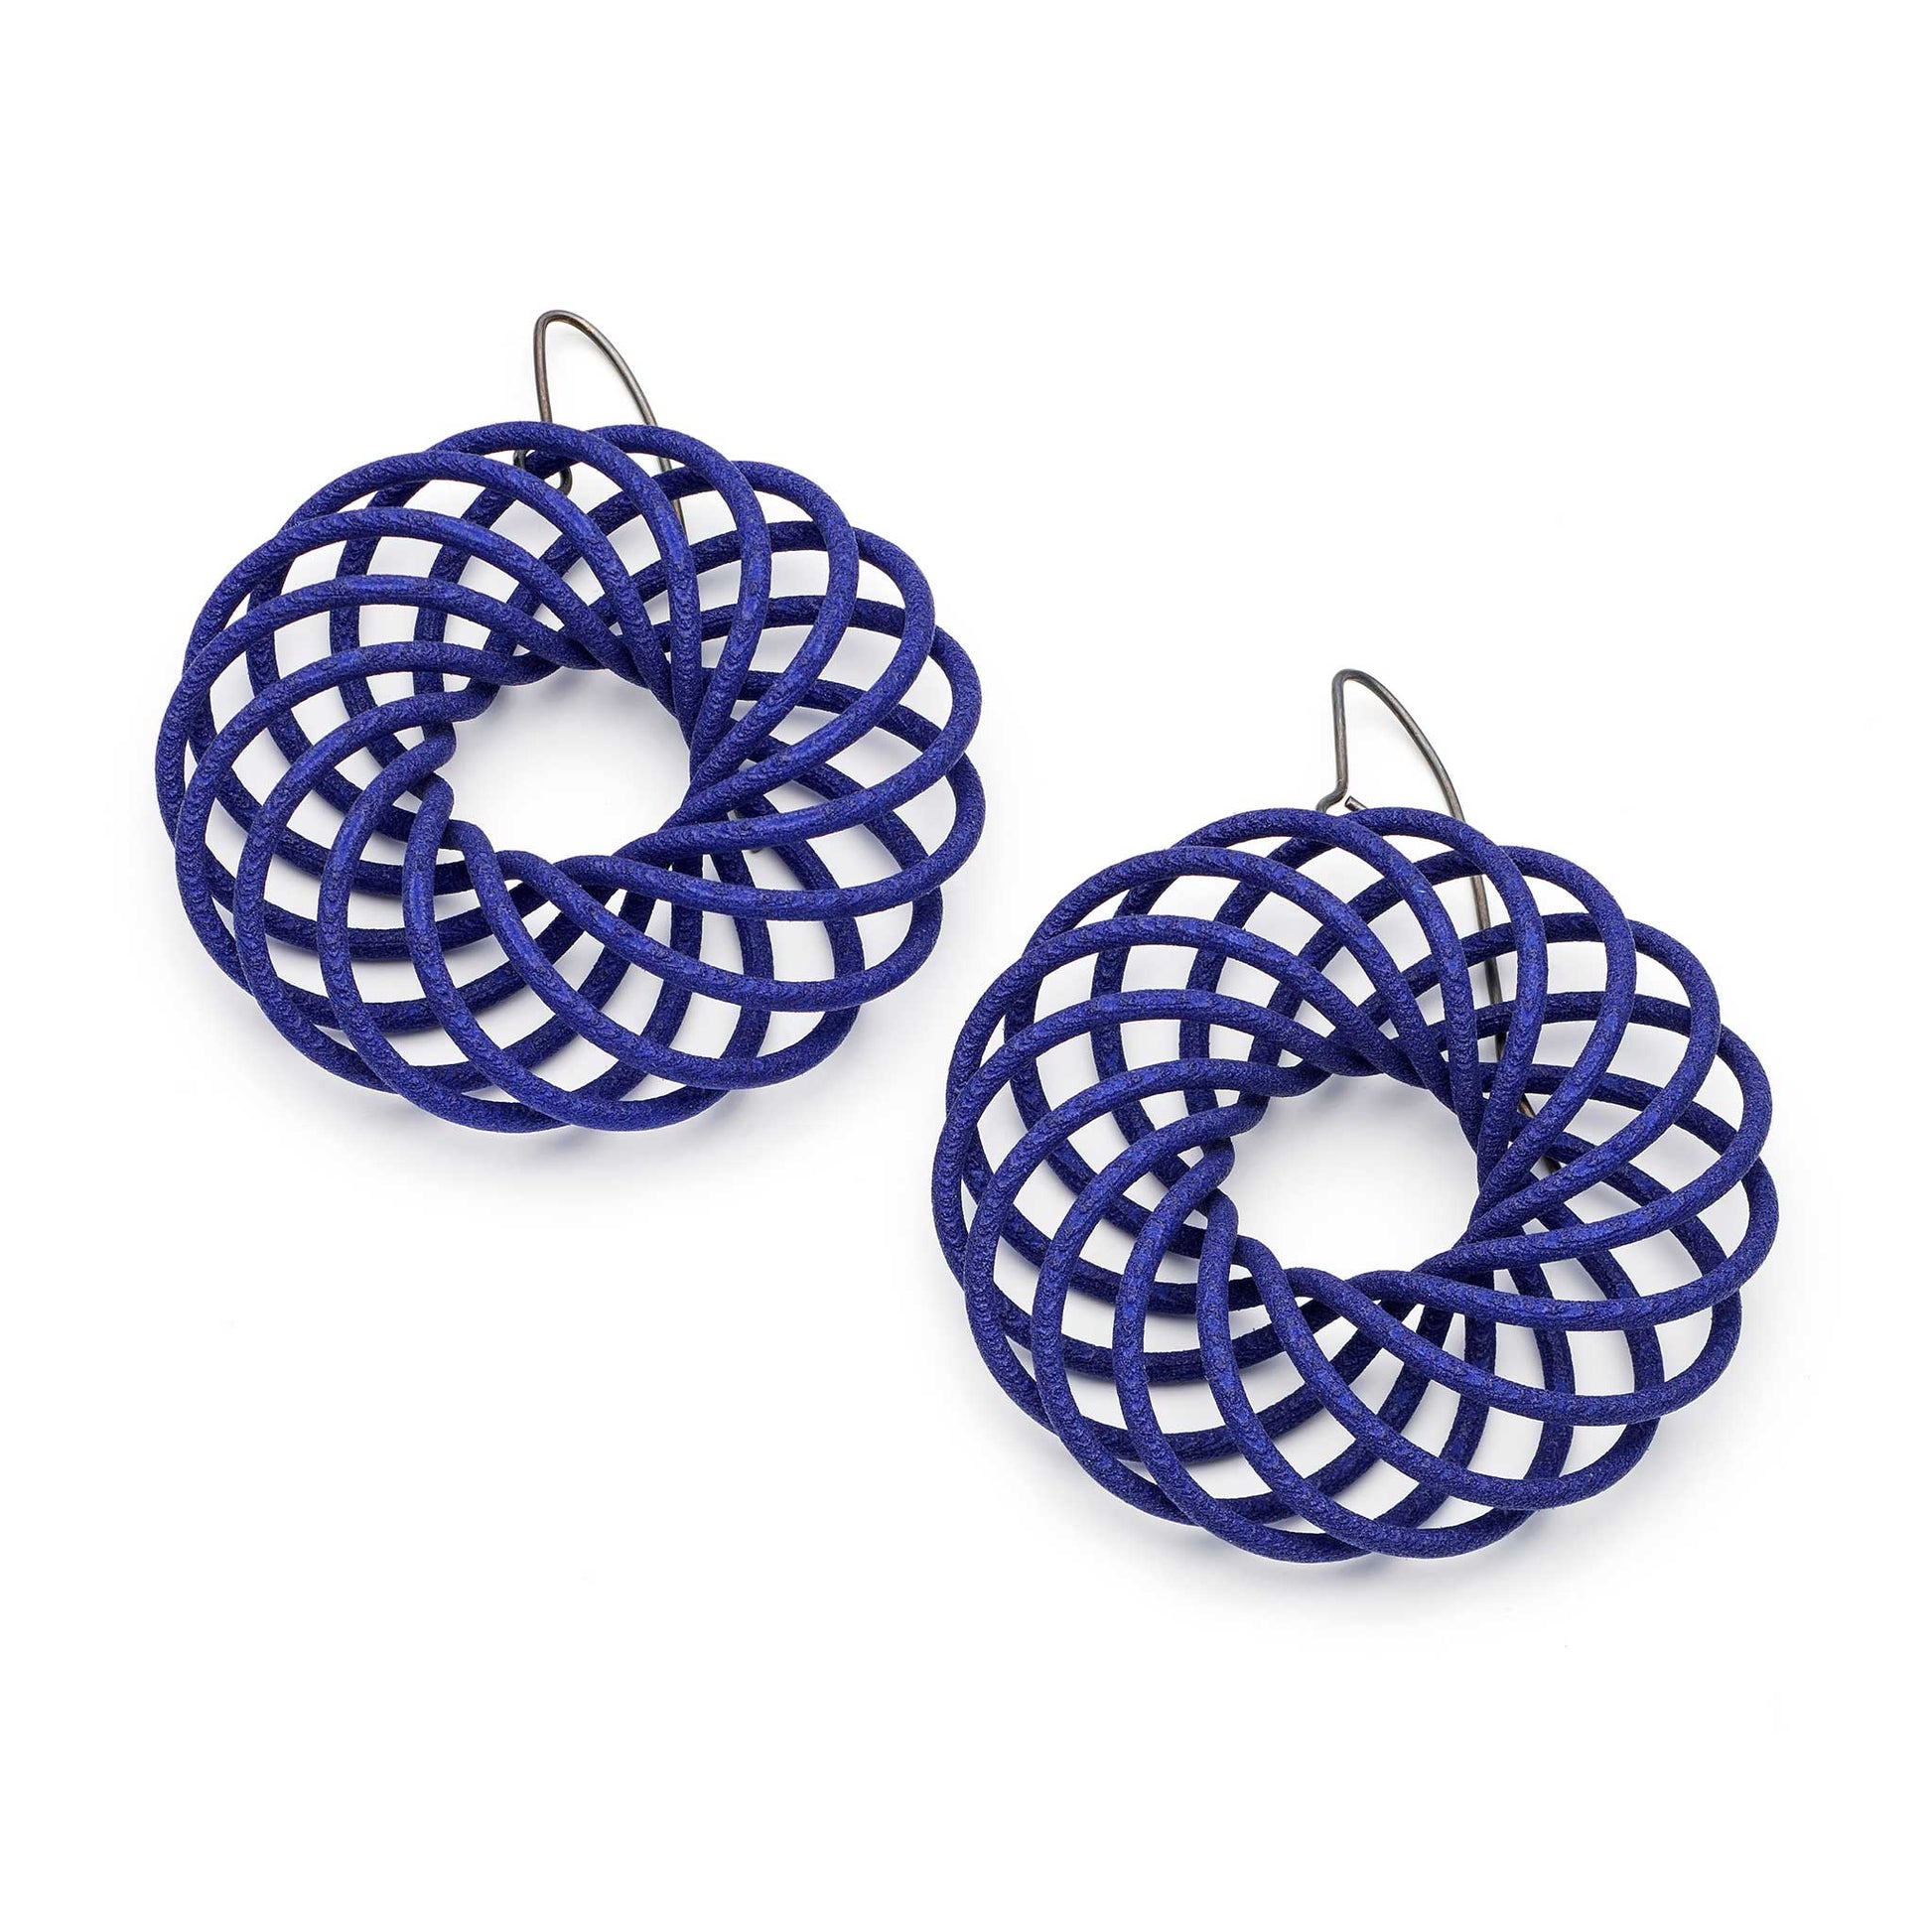 Large blue Vortex 3D printed nylon earrings by Katy Luxton 